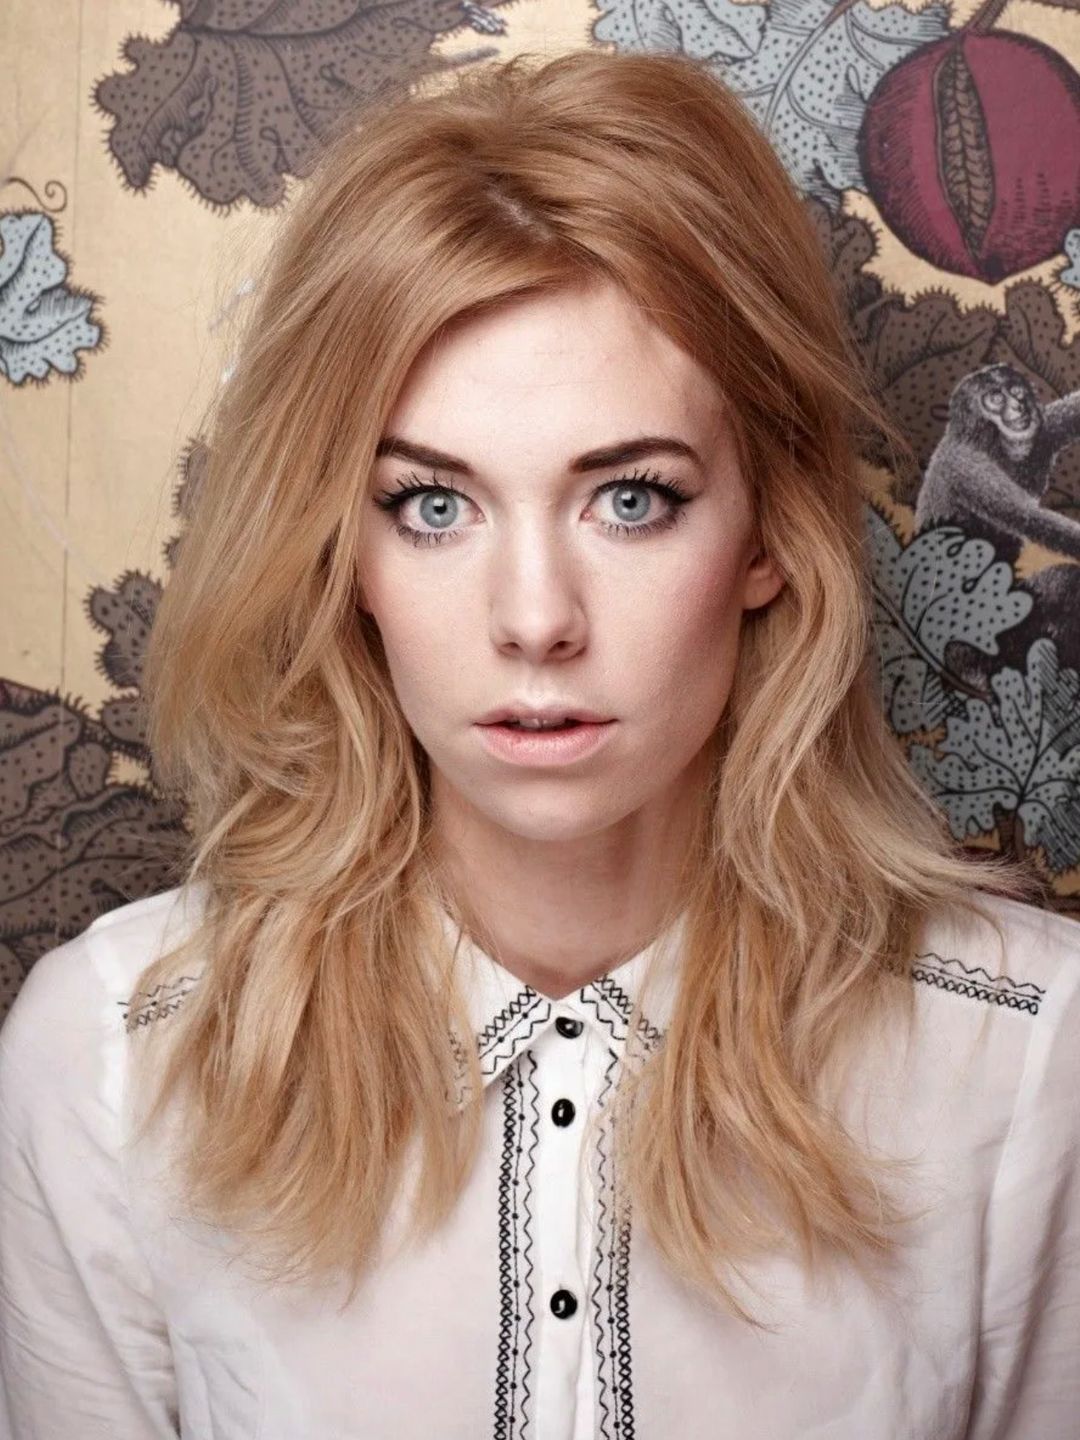 Vanessa Kirby who is her mother